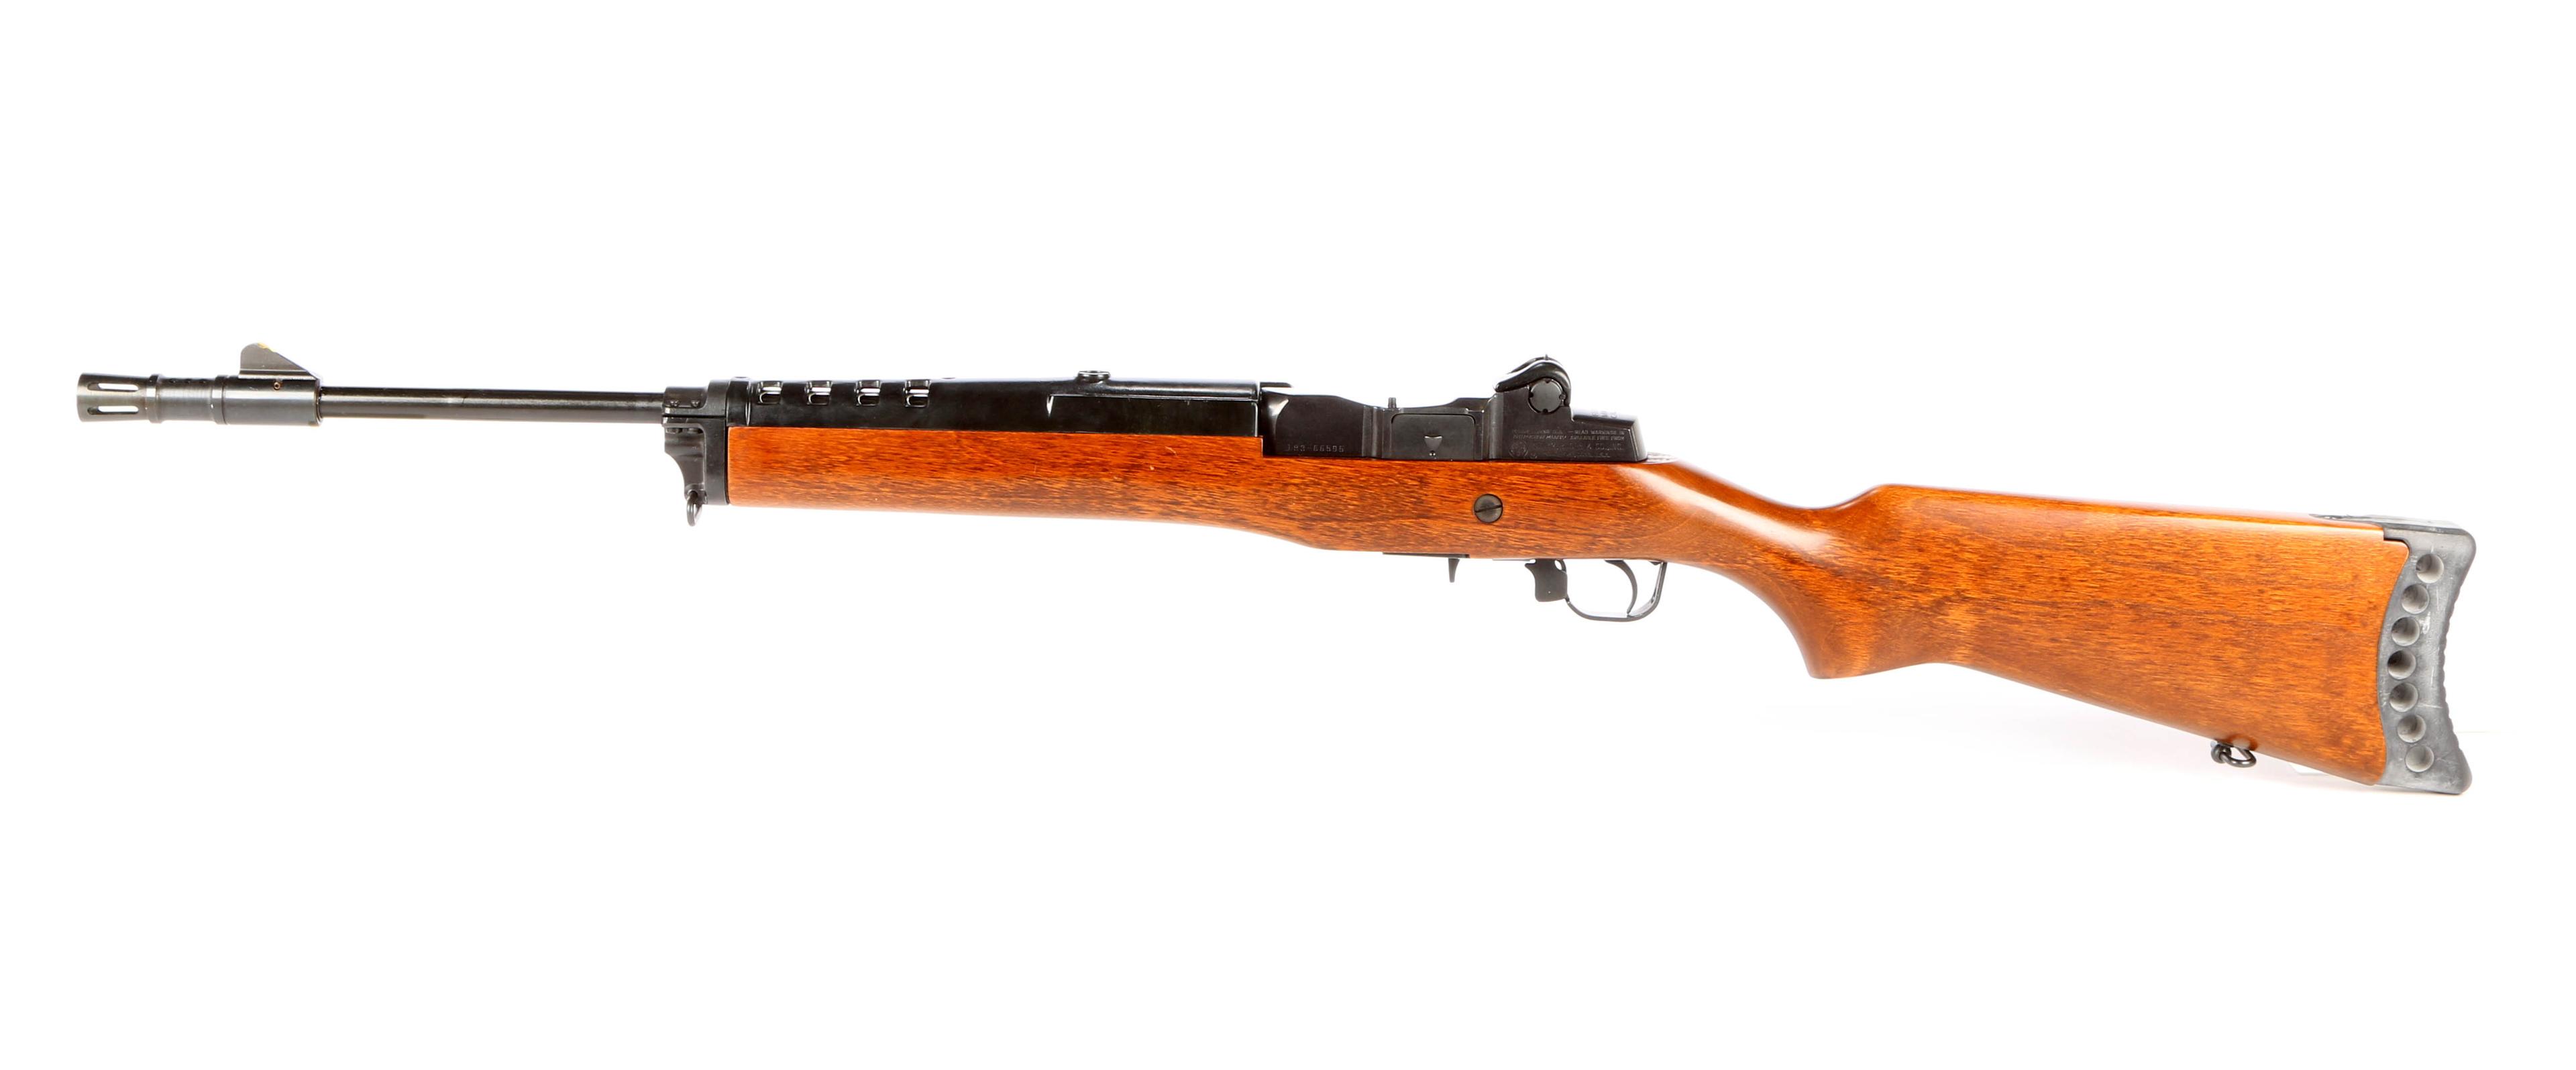 Ruger Mini-14 in .223 Remington